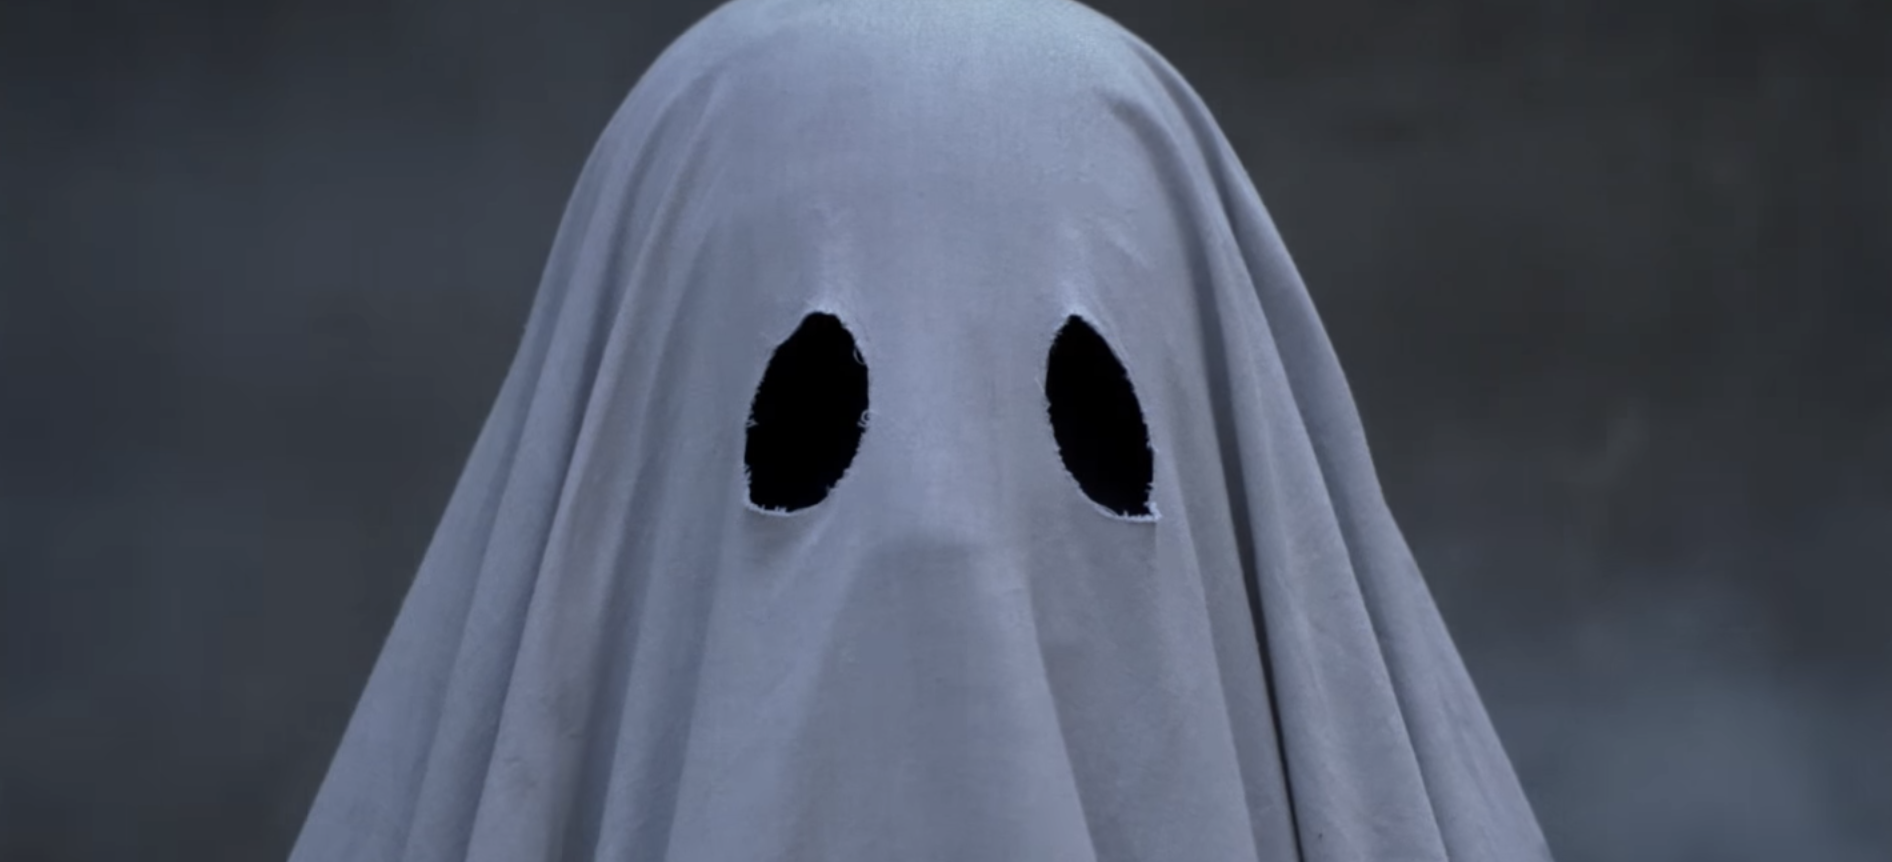 A Ghost Story Looks Like A Poignant Take On What It Means To Be Haunted ...